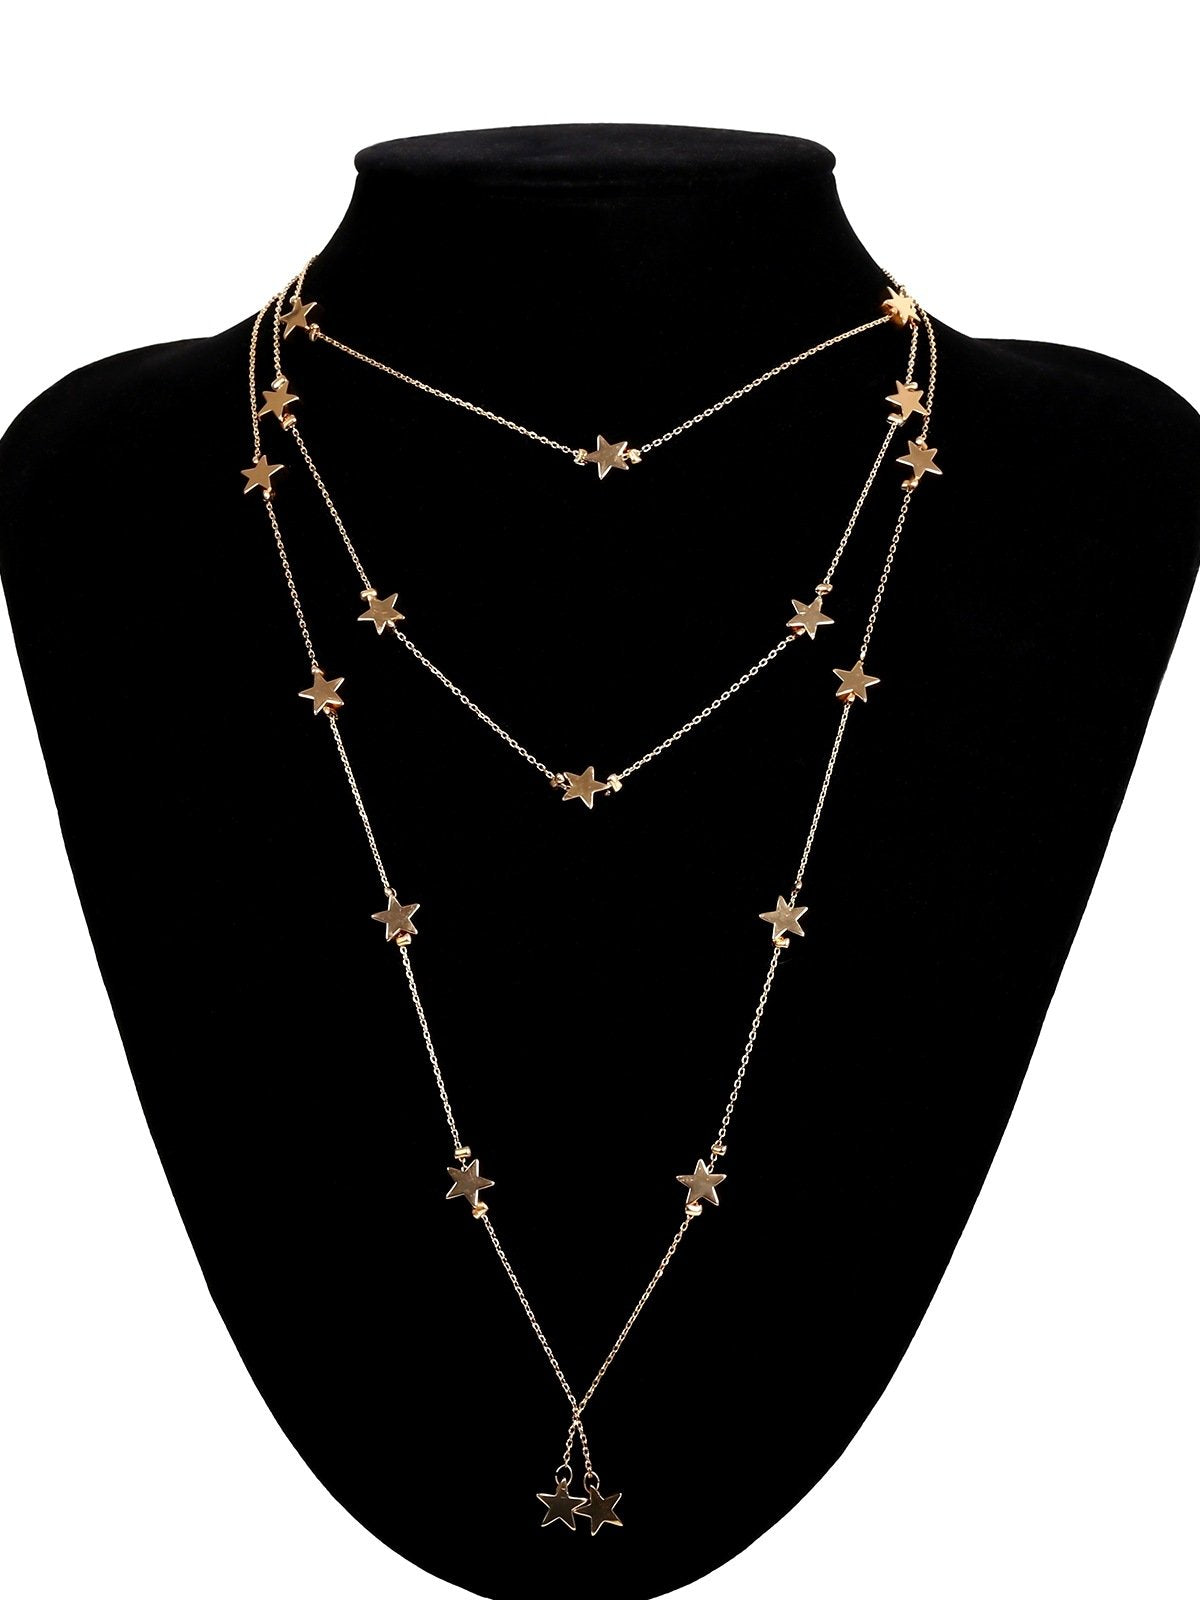 Stars Beaded Multi Layered Chocker Necklace Gold on sale - SOUISEE